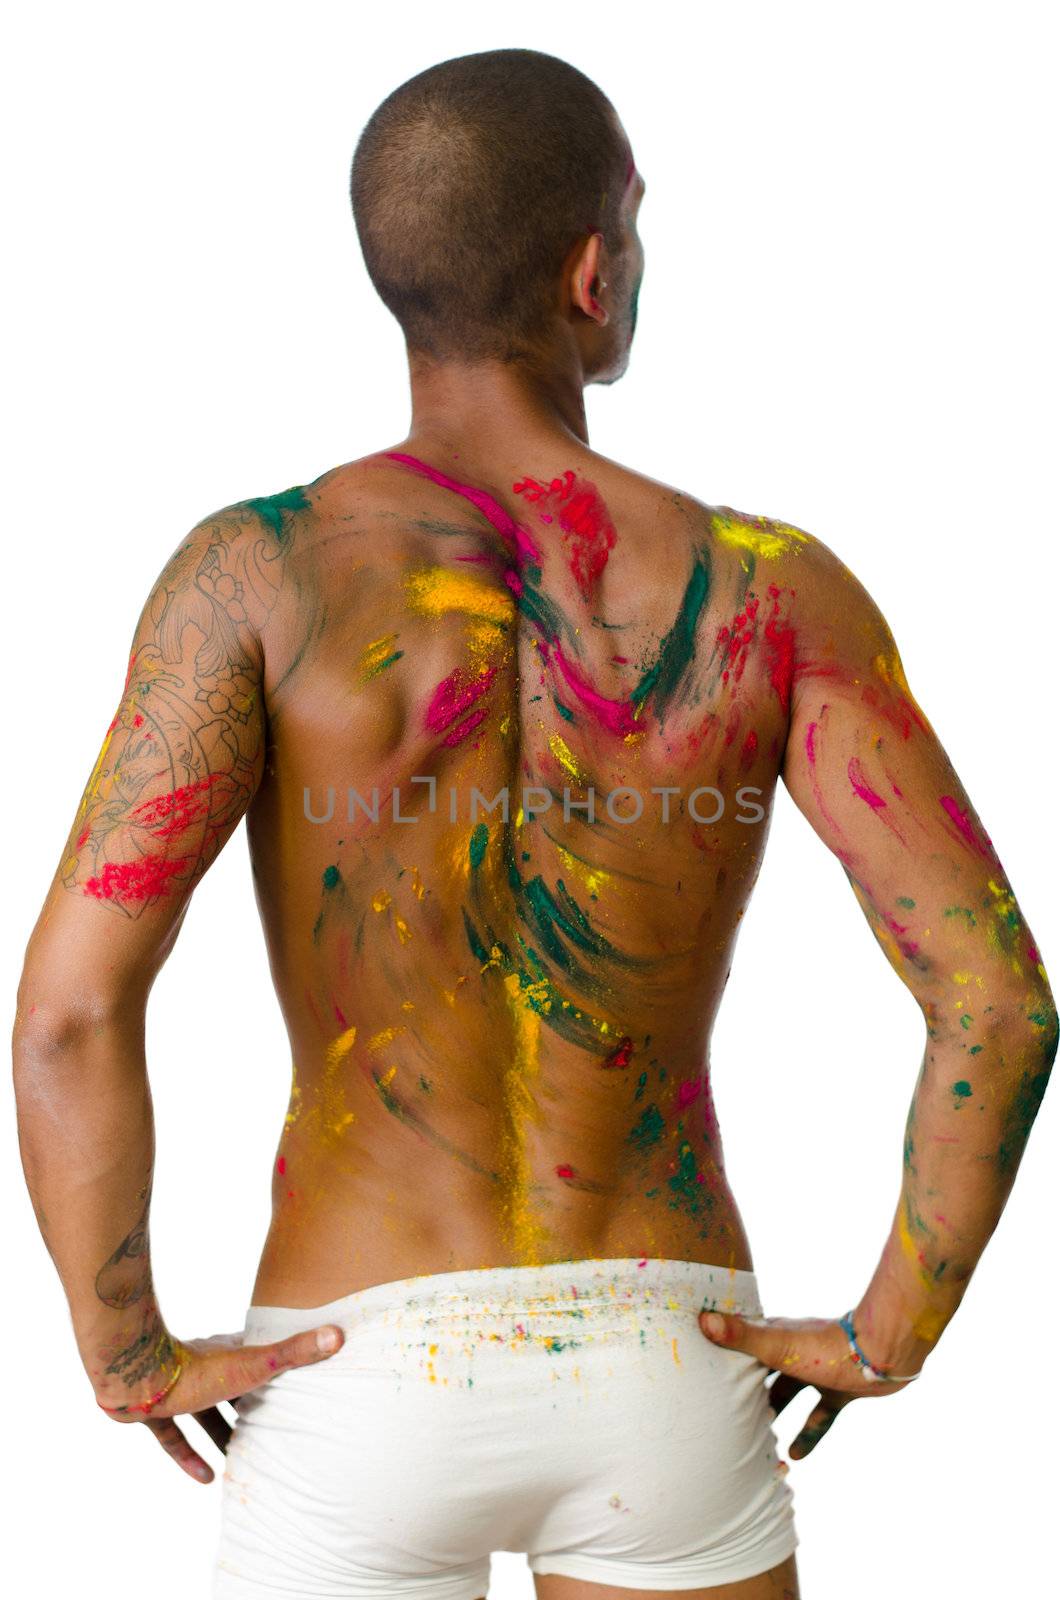 Handsome young man seen from the back with skin all painted with colors